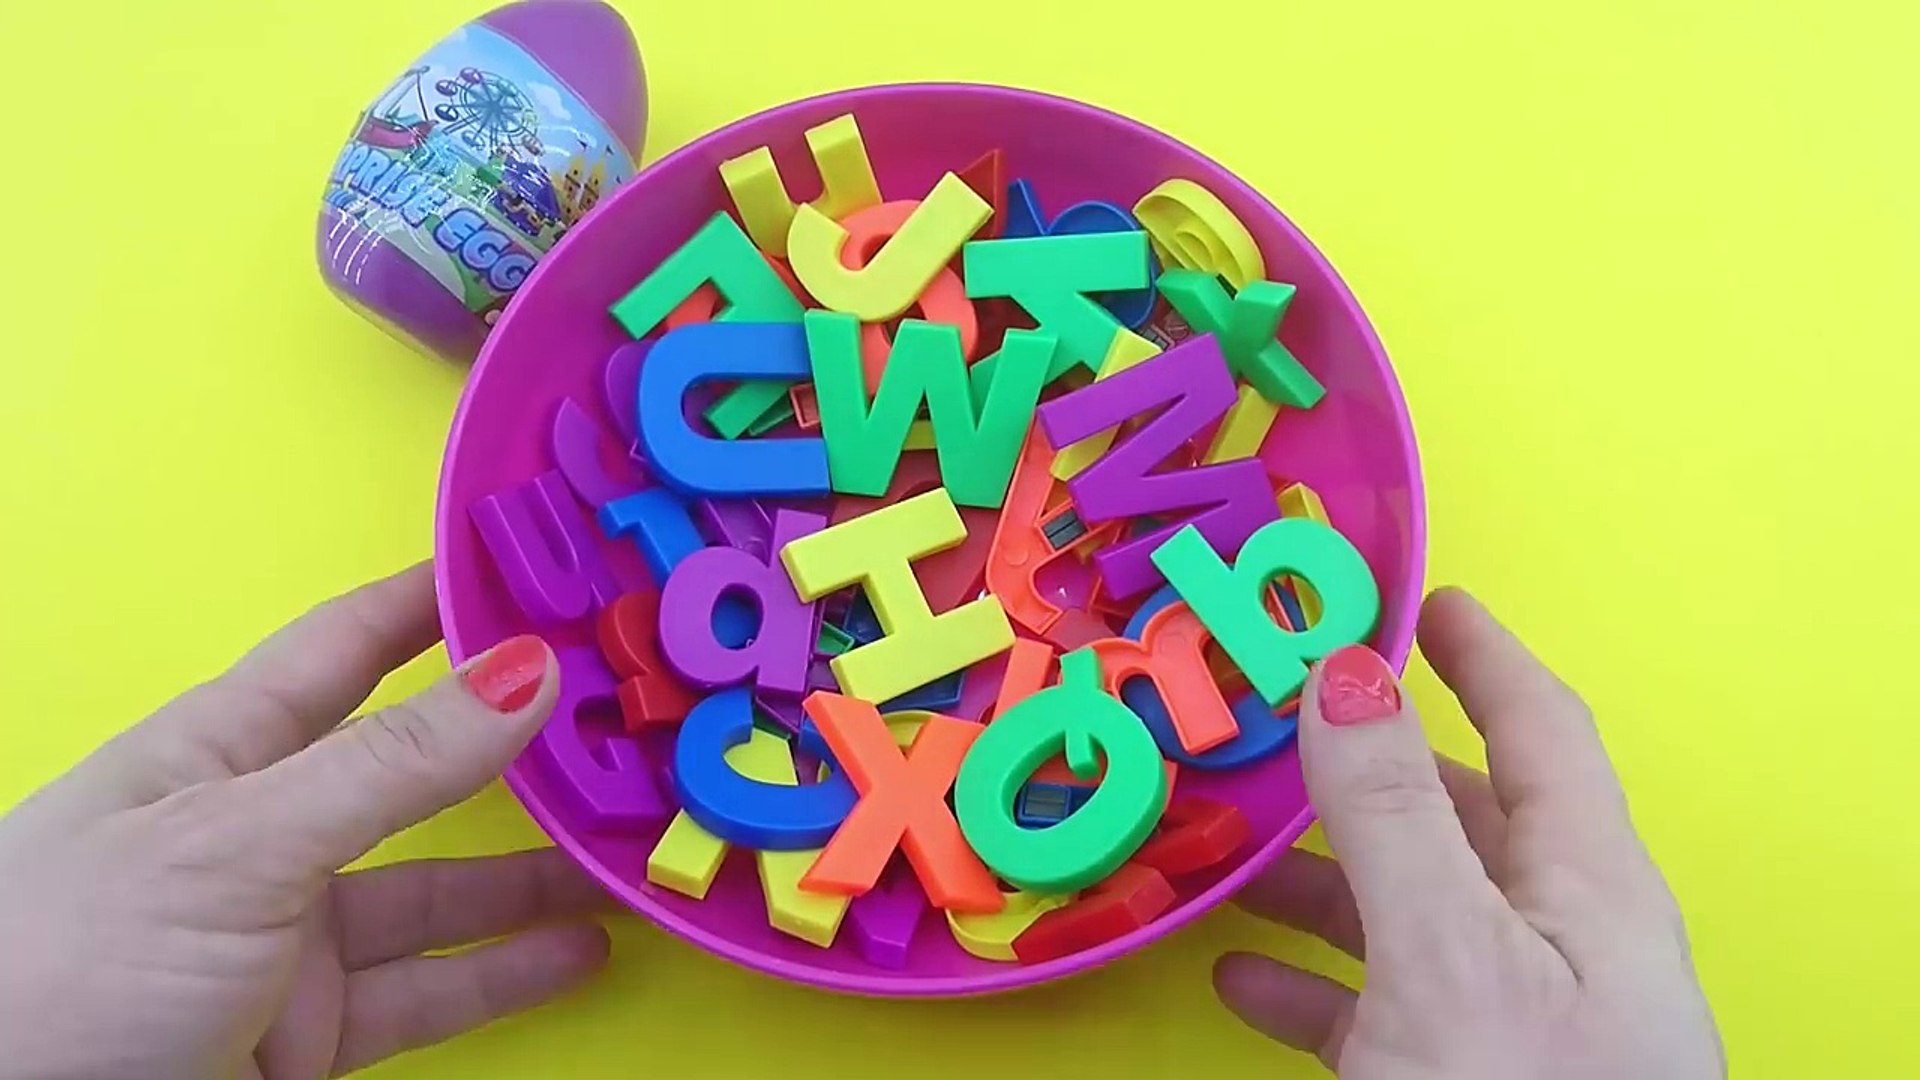 Alphabet Goop, Funny ABC Flashcards Learning, Preschool Activities,  Educational Baby Games - Dailymotion Video